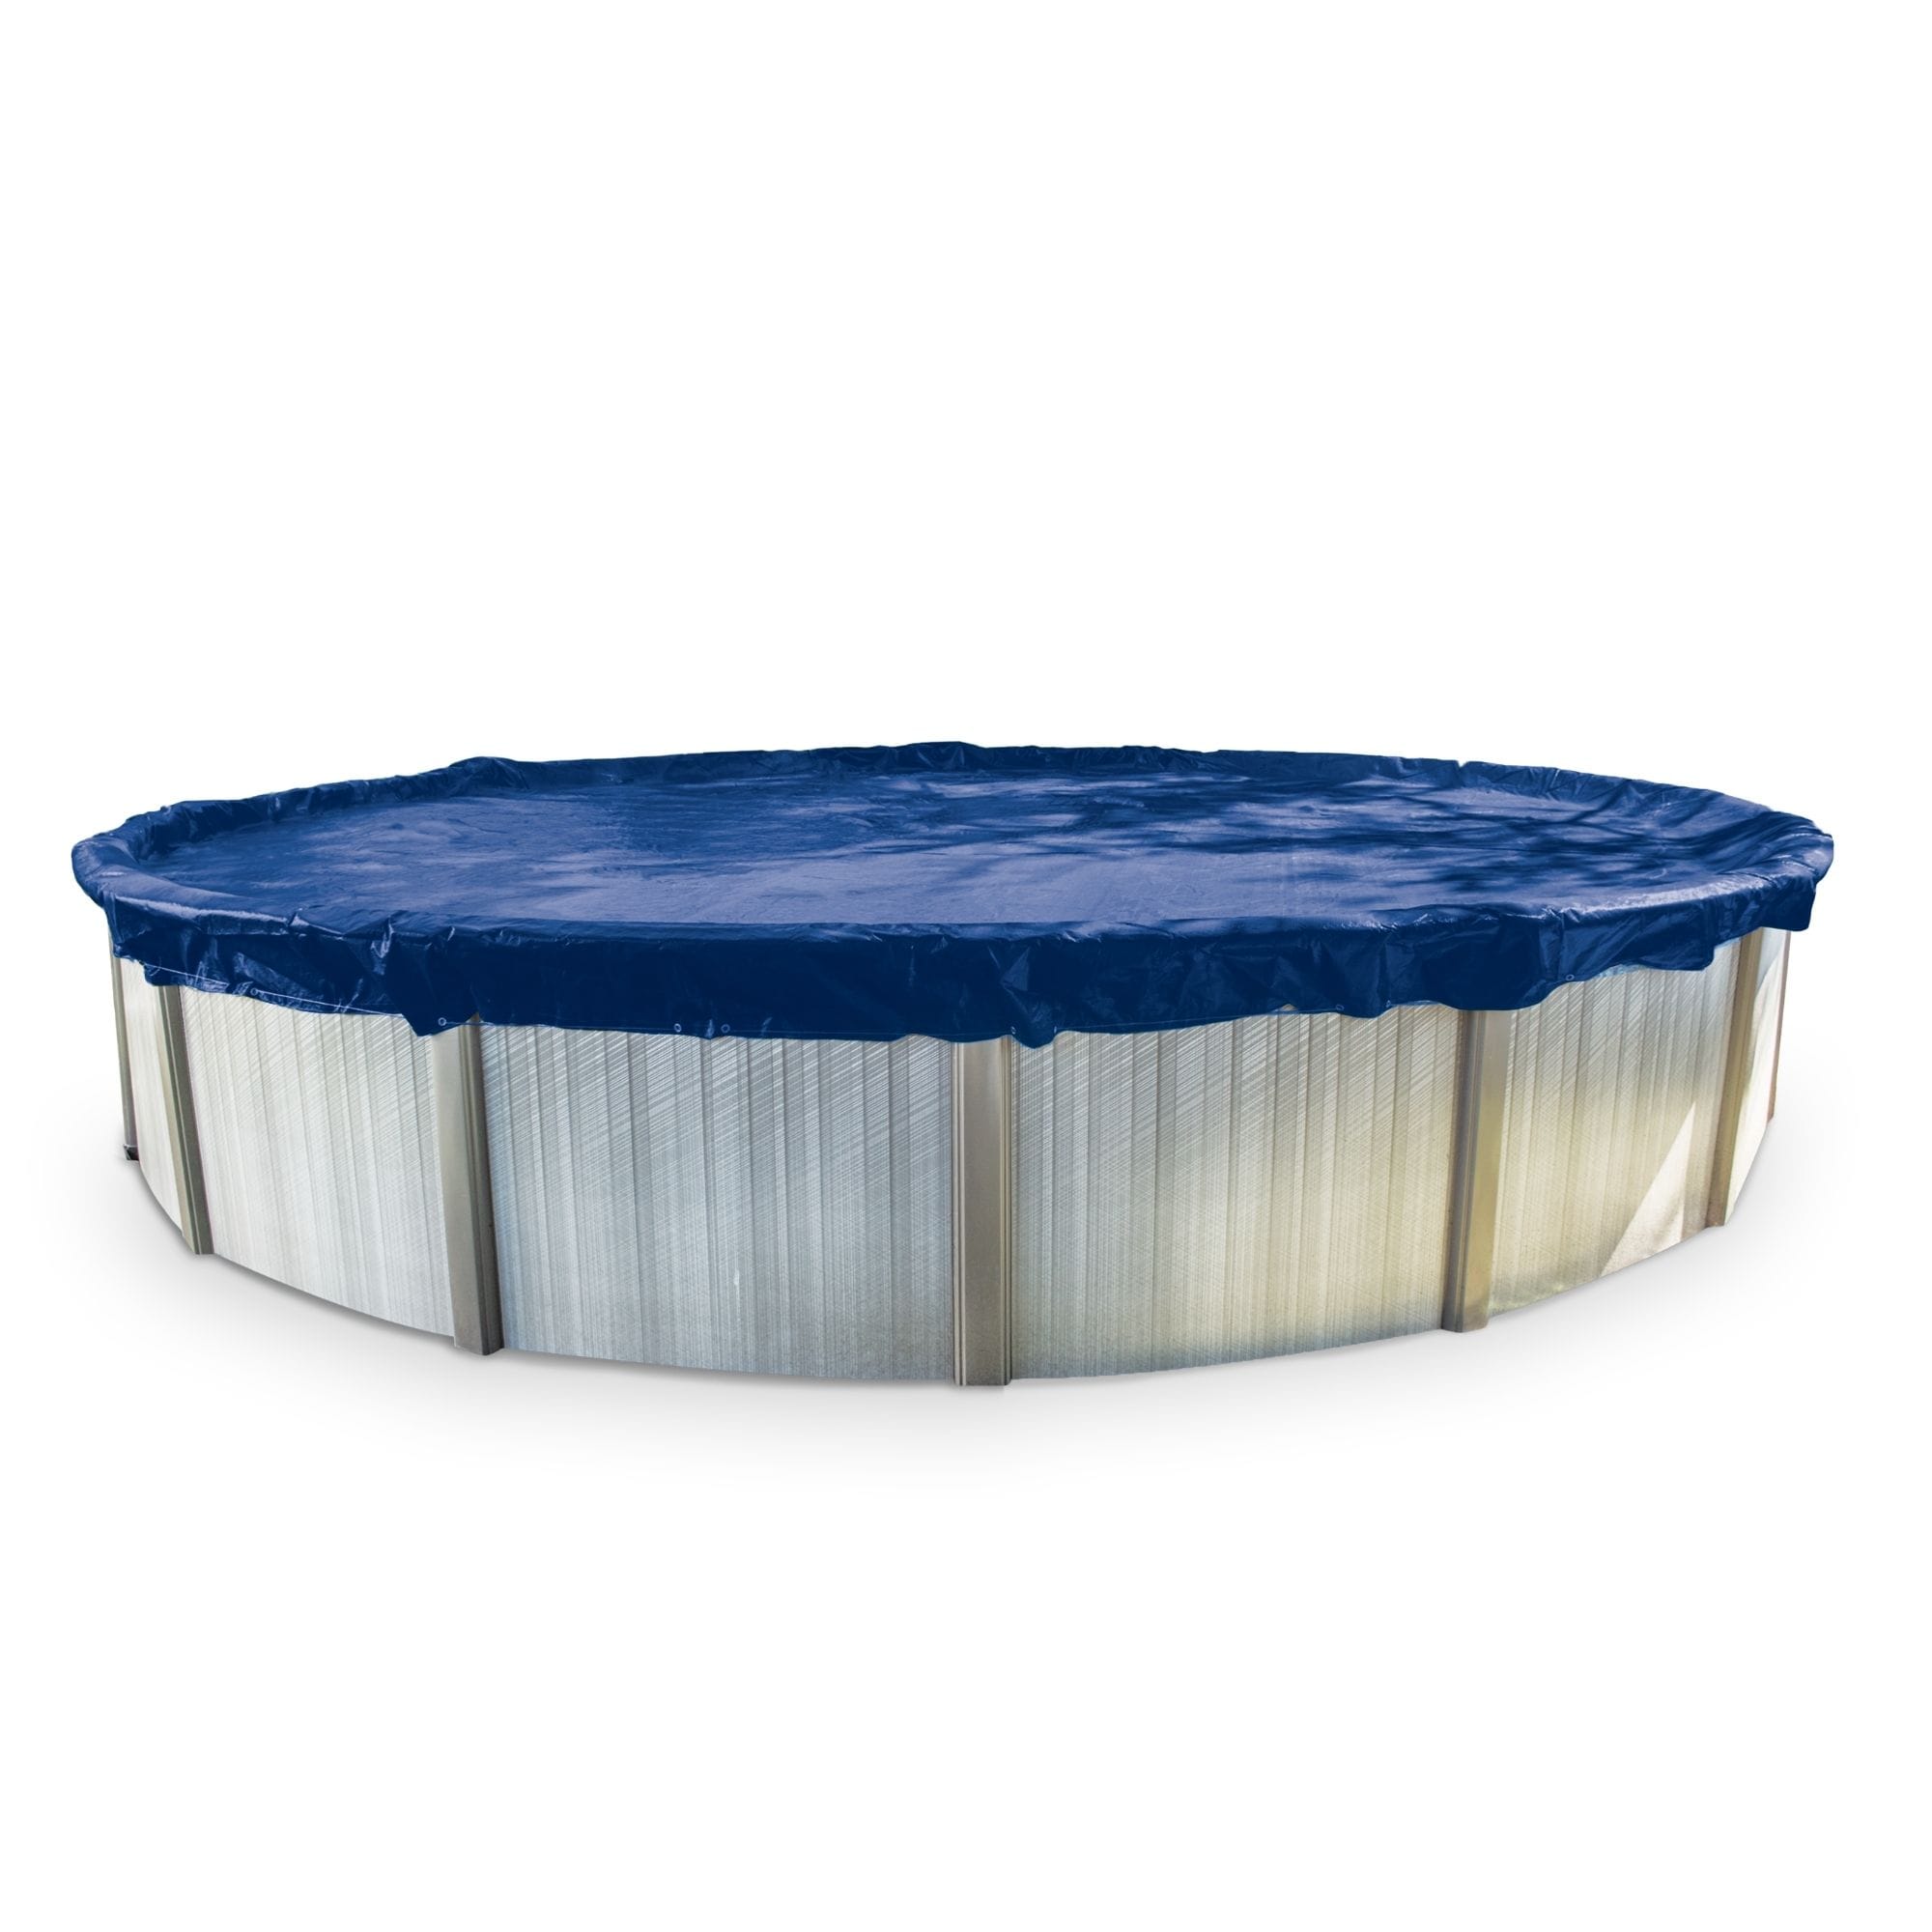 20 Foot Wide Pool Covers at Lowes.com